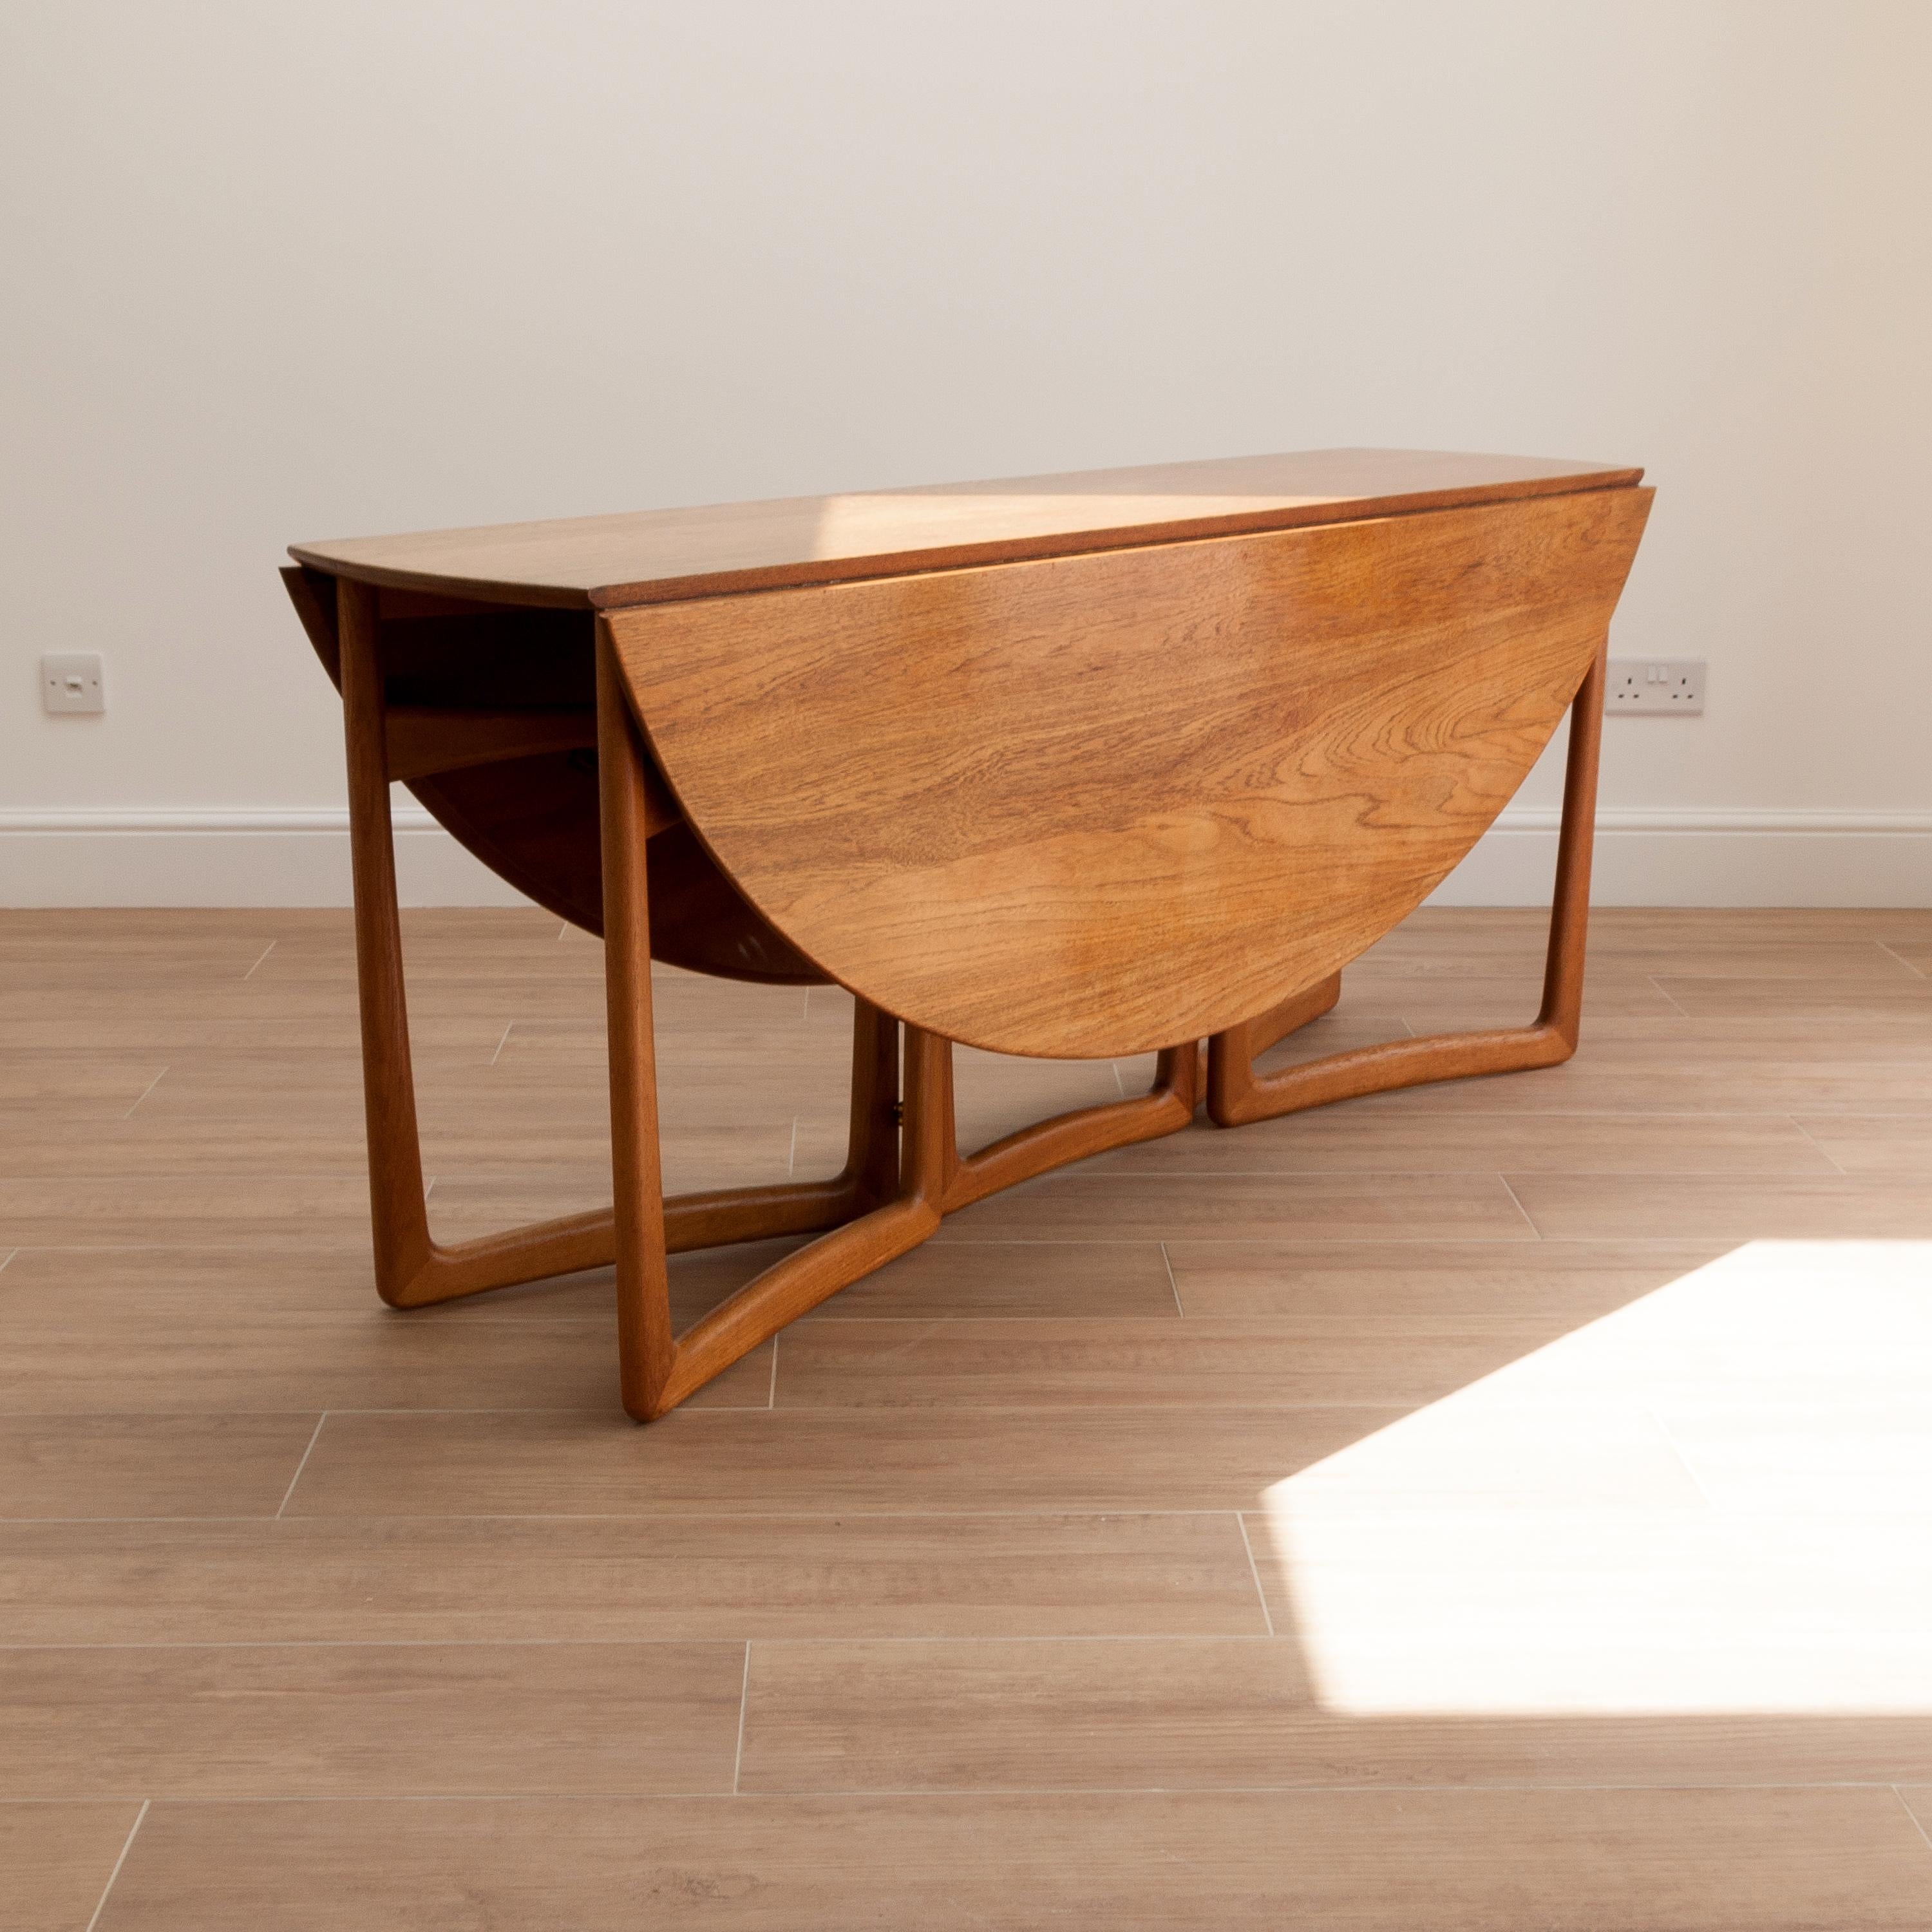 A fabulous Hvidt and Mølgaard-Nielsen drop leaf table in solid teak with brass ball hinges. The sculptural legs fold away to allow the leaves to drop. Beautiful detail to the brass hinges. This table is an iconic example of Hvidt and